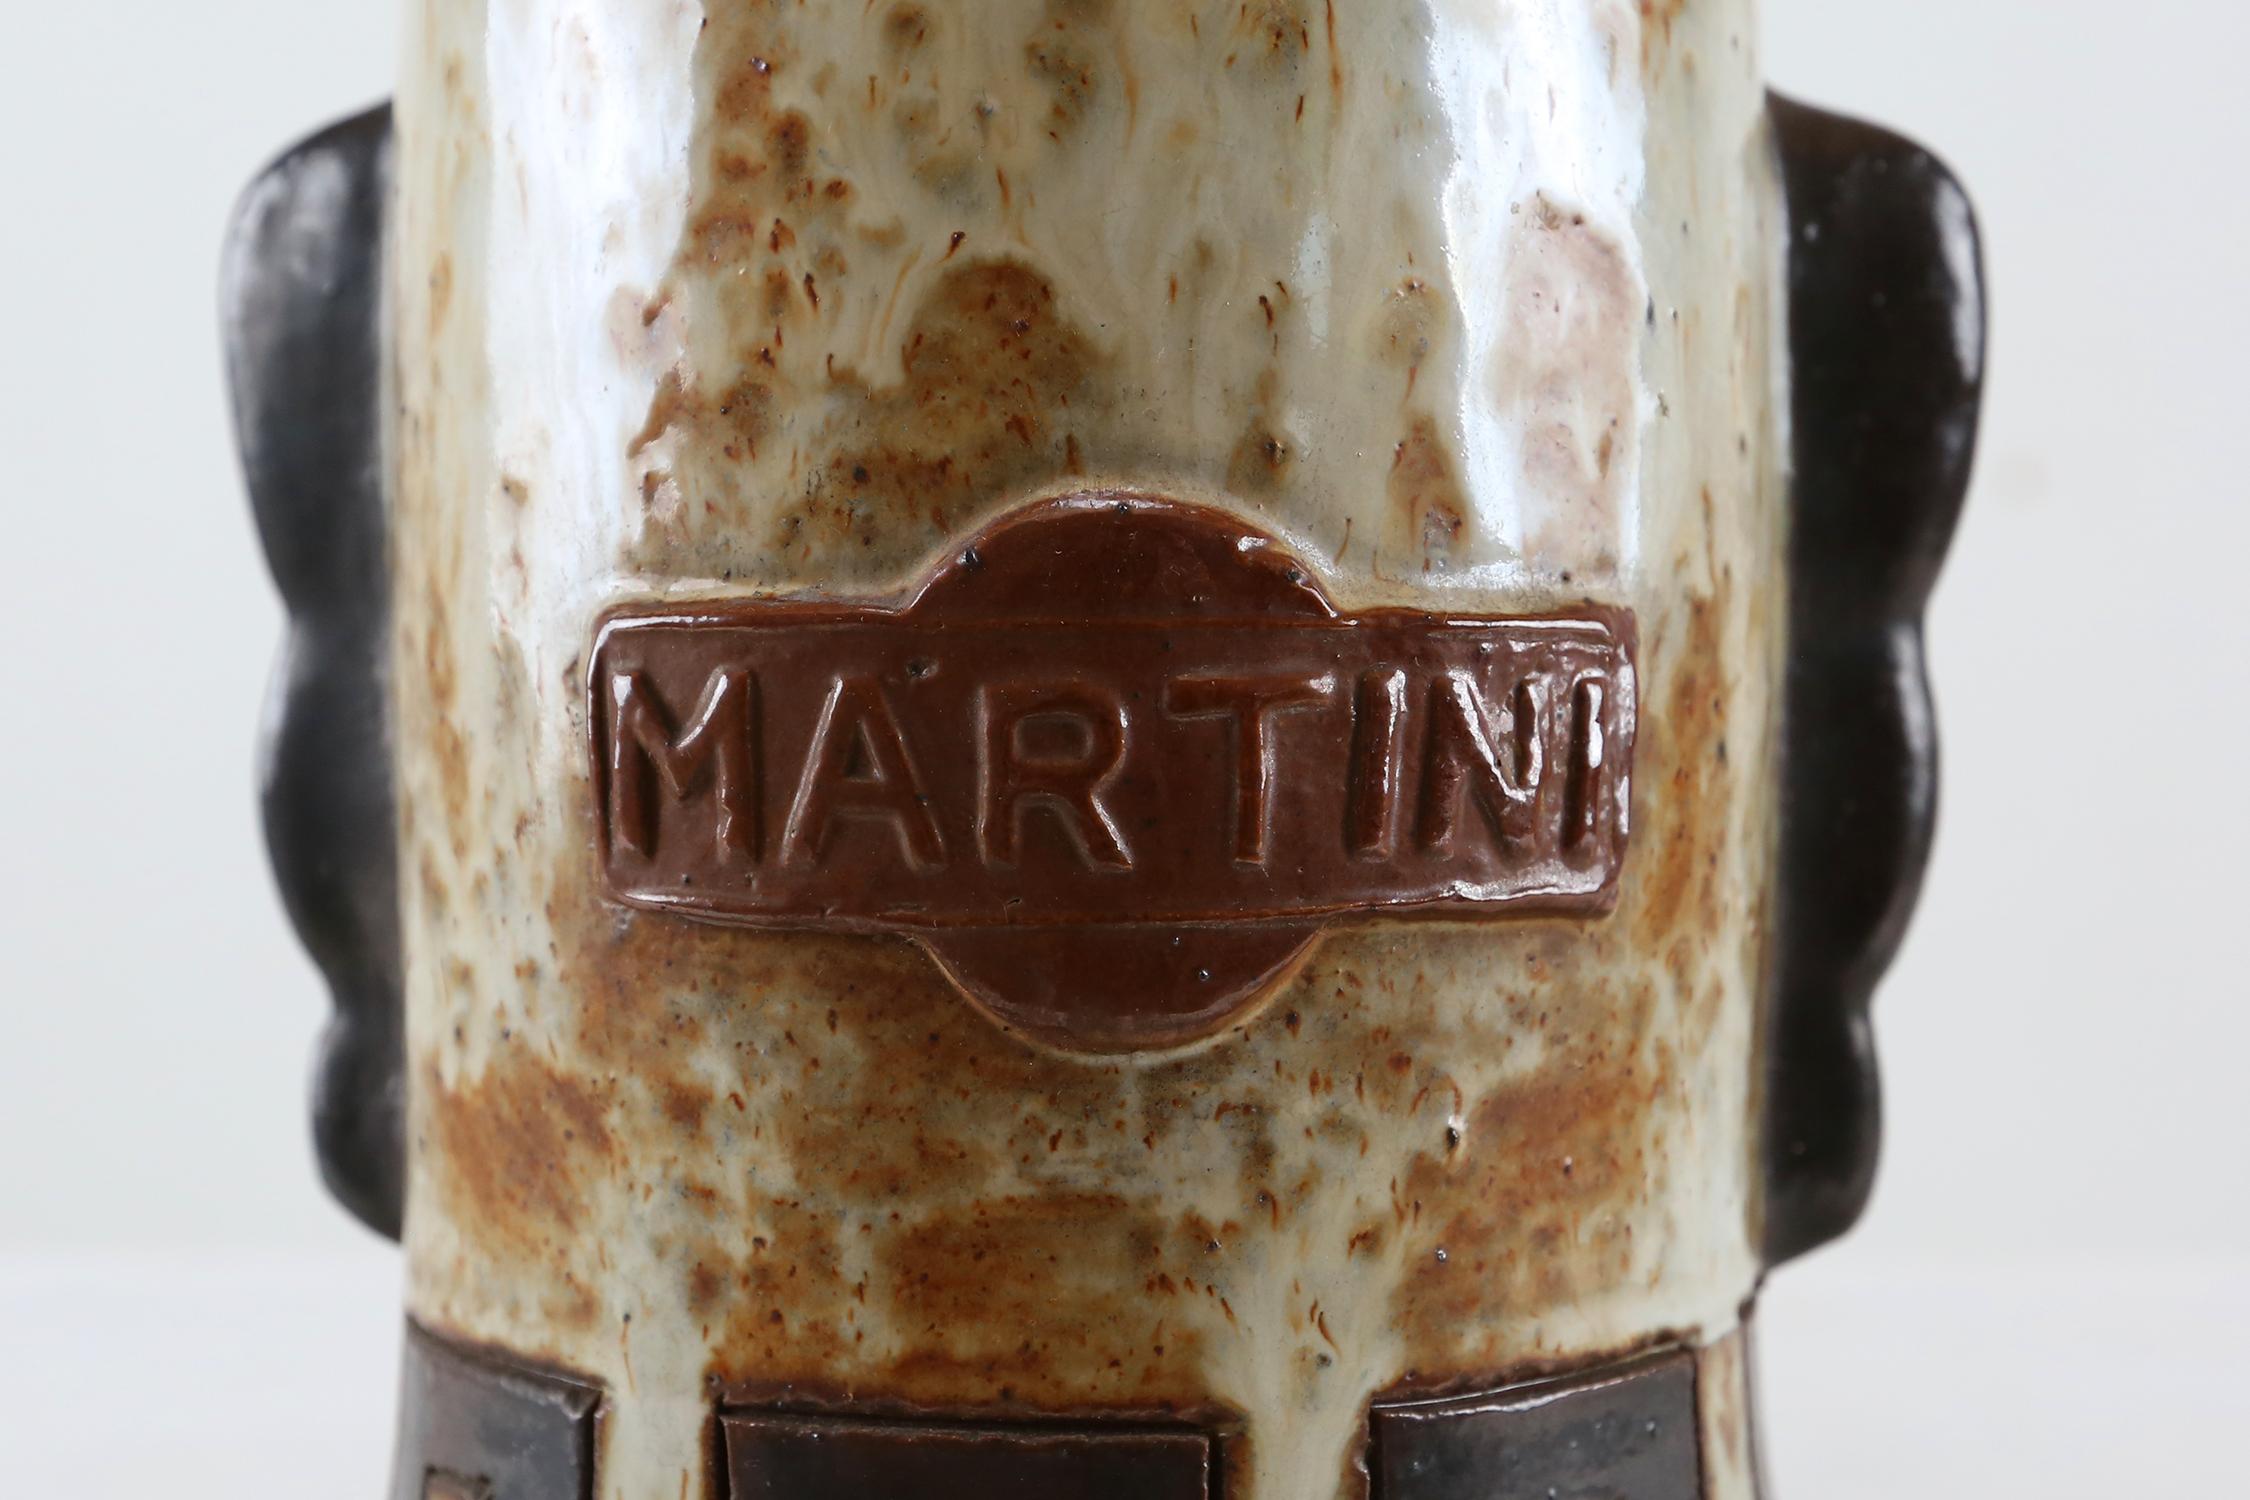 Mid-20th Century Table Lamp by Martini 1950's For Sale